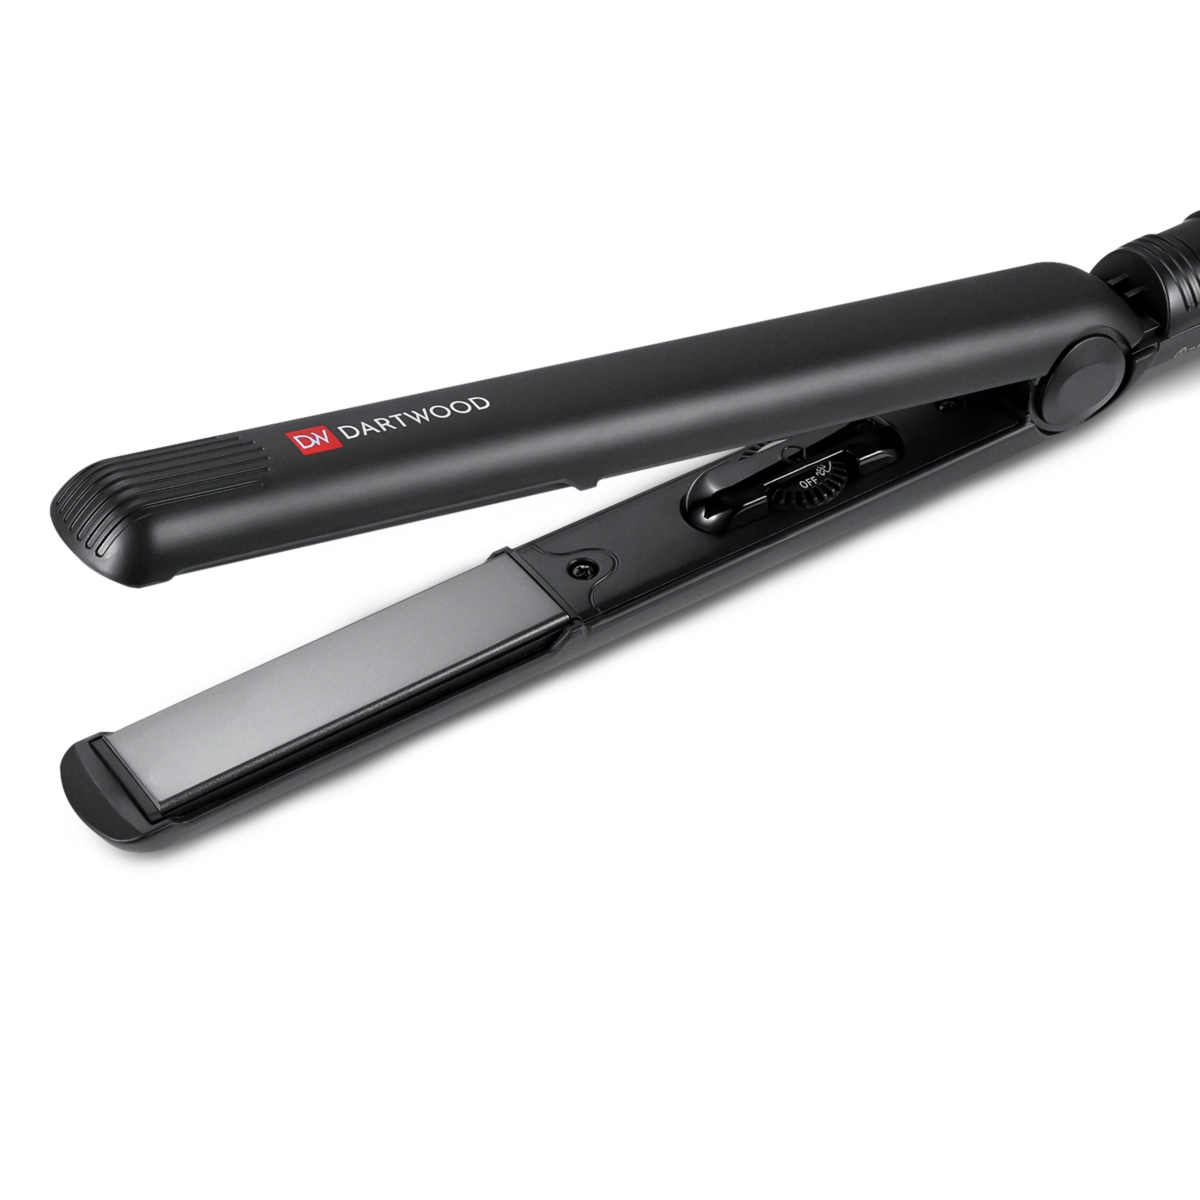 40W Portable Ceramic Hair Straightener - Professional Salon Styling Tool Appliances to Help You Look Your Best (Black) - Black